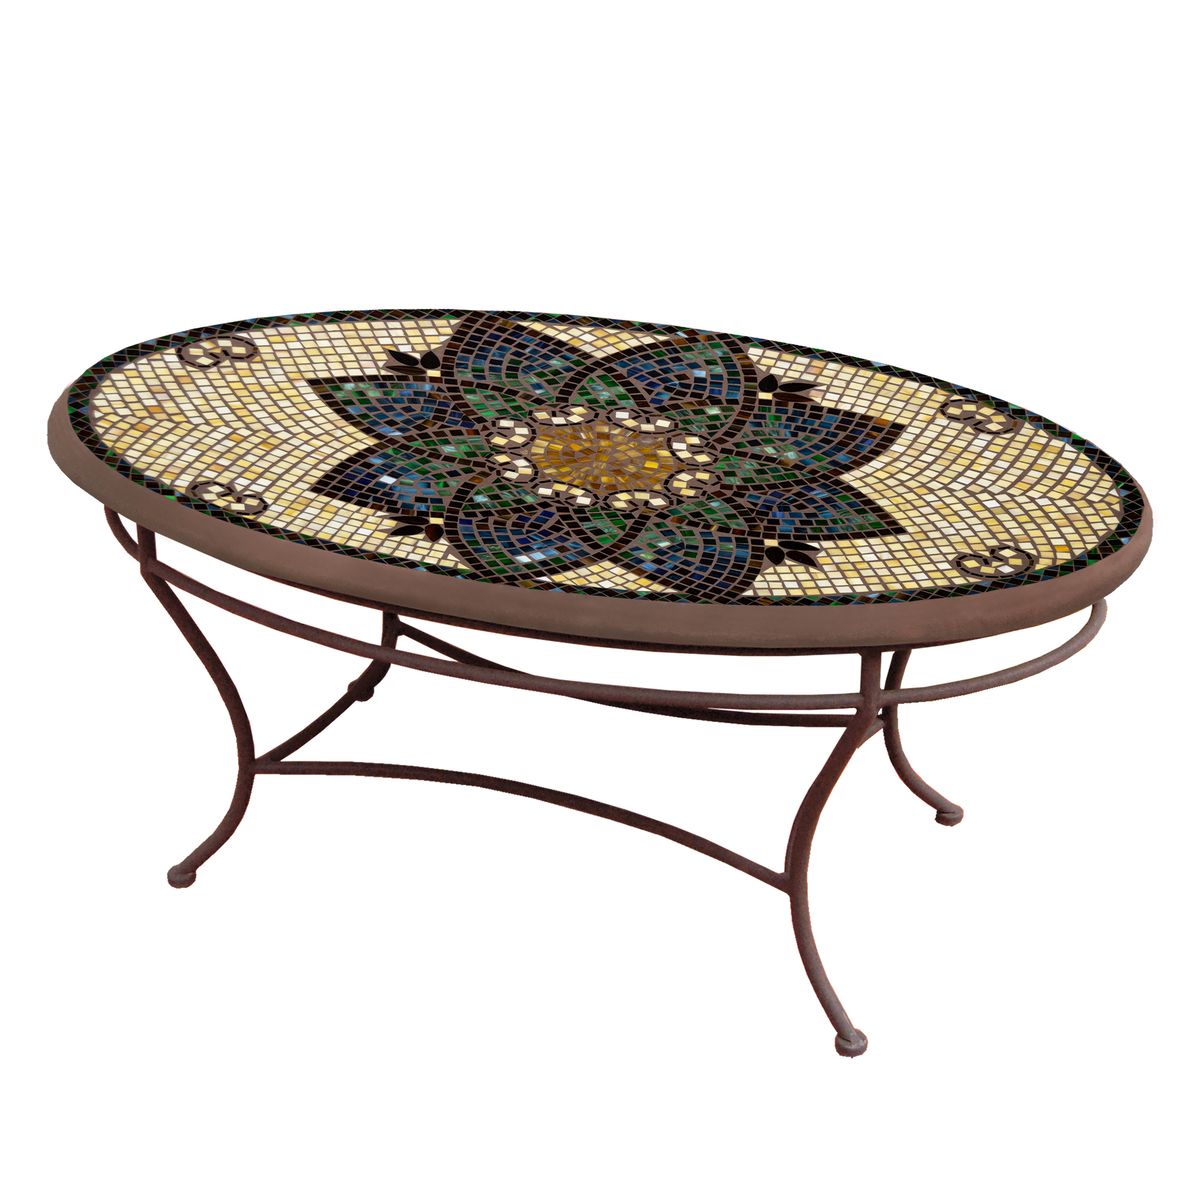 Monaco Mosaic Coffee Table - Oval-Iron Accents